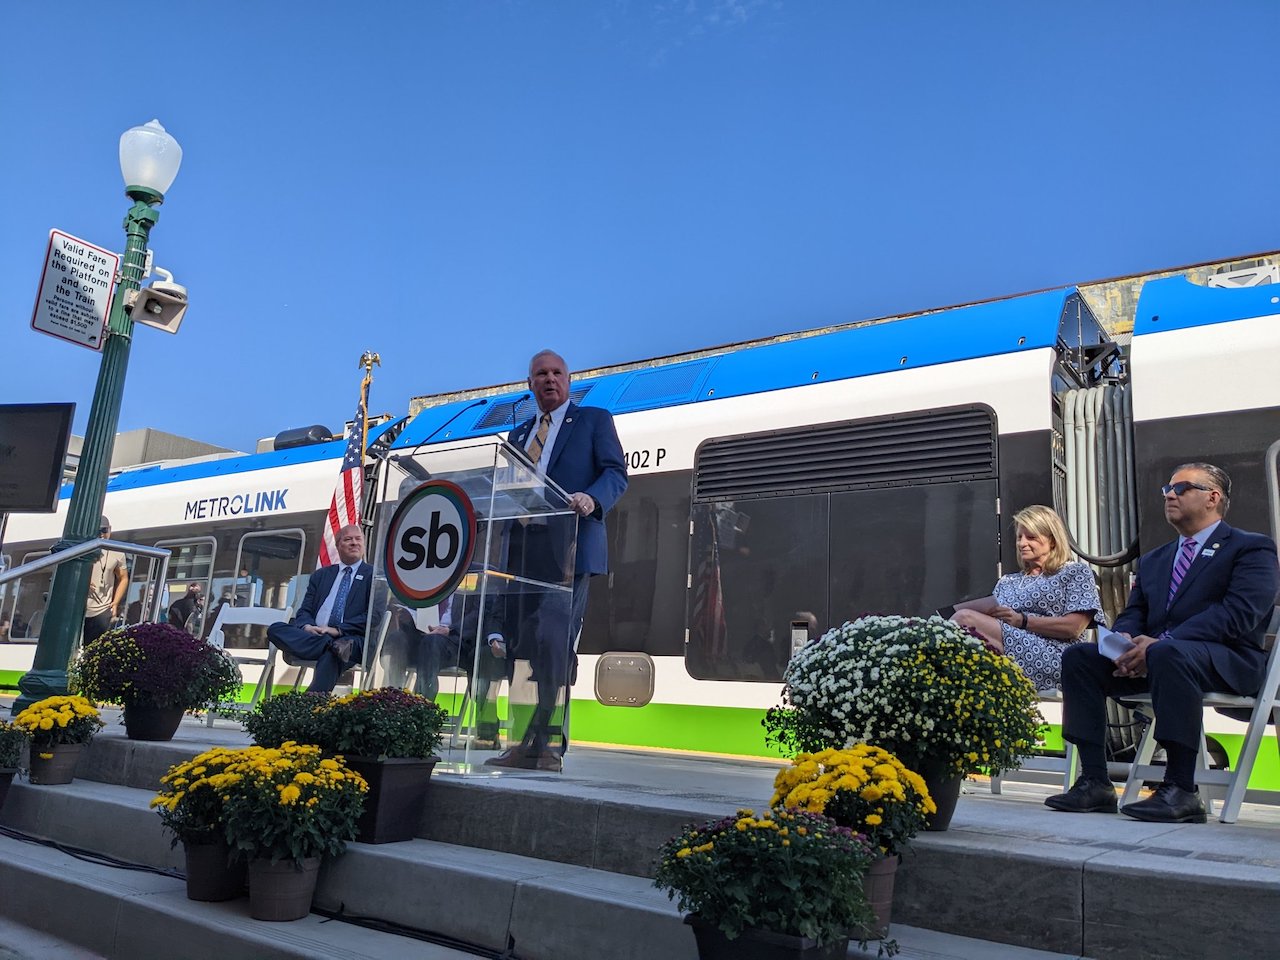 Metrolink's new Arrow service begins Monday, Oct. 24, following an Oct. 21 ribbon-cutting ceremony. (Photo Courtesy of SBCTA via Twitter)